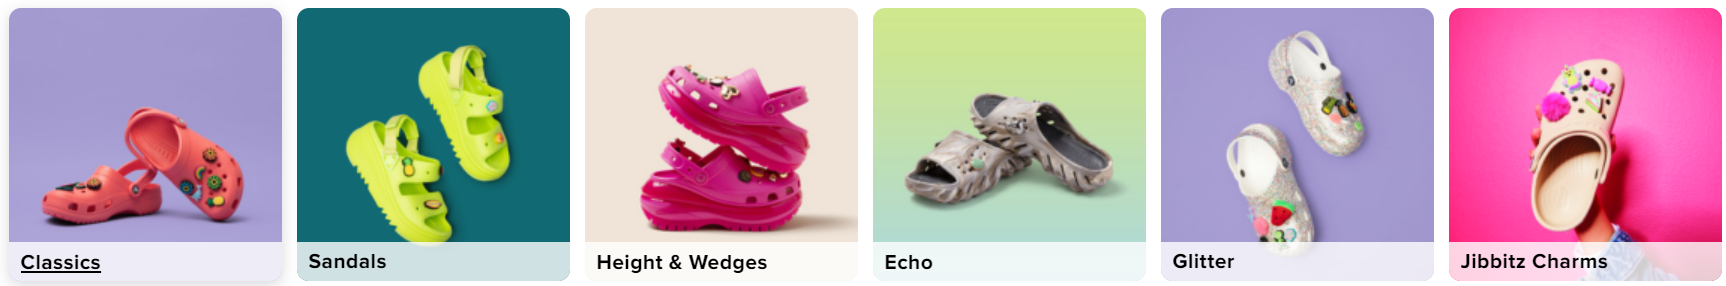 Crocs Variety of shoes